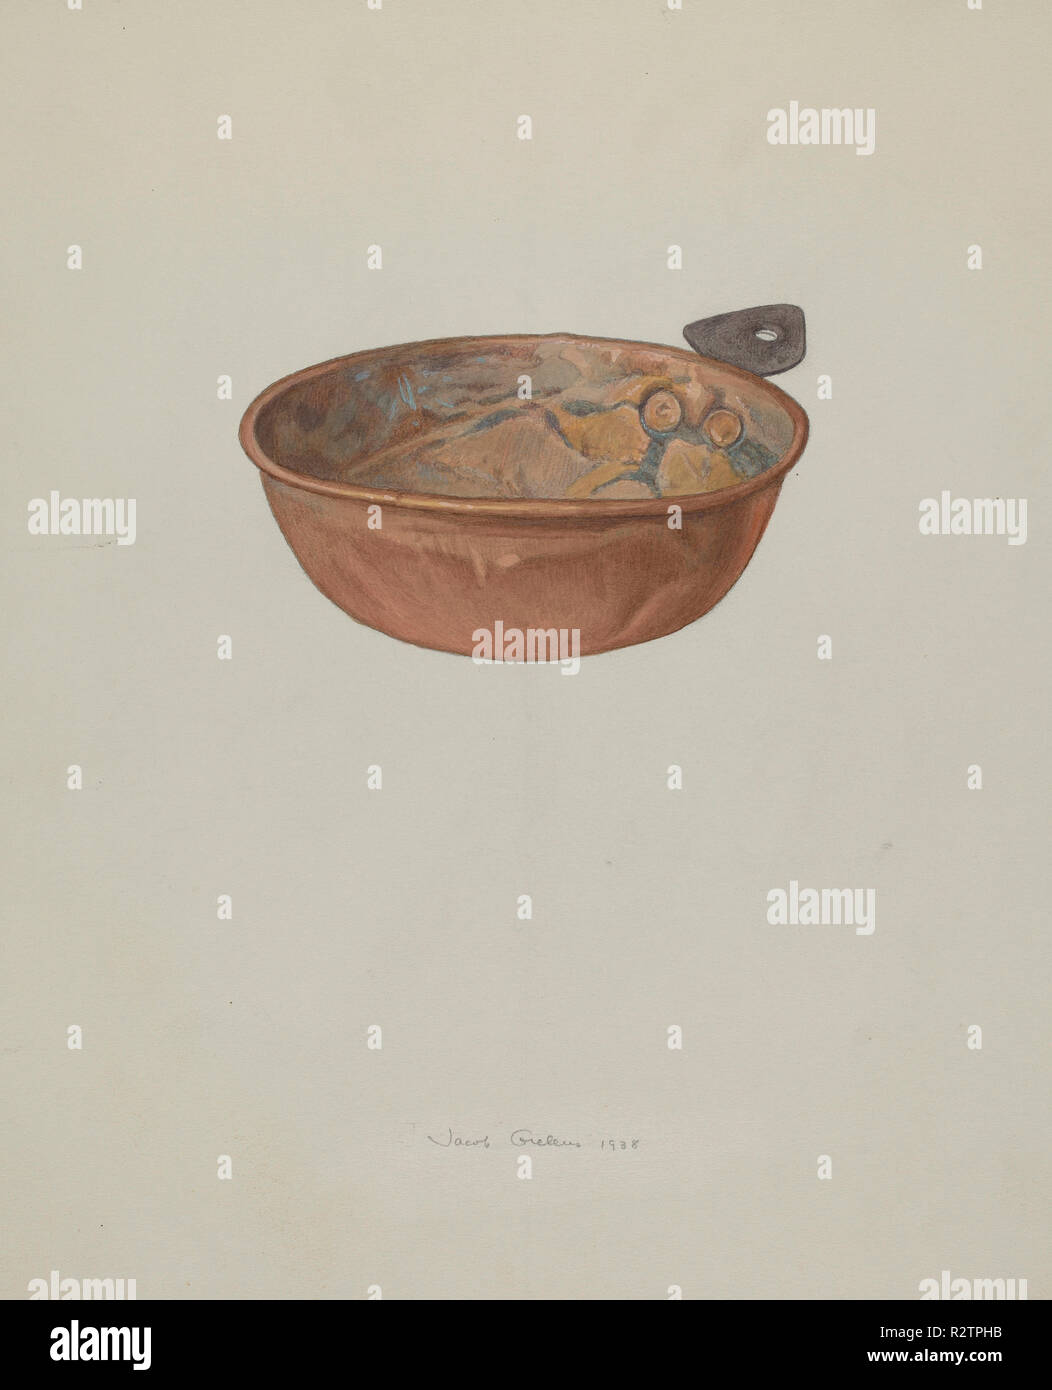 Child's Porringer. Dated: 1938. Dimensions: overall: 28.1 x 23 cm (11 1/16 x 9 1/16 in.)  Original IAD Object: 1 3/4' high; 4 1/2' in diameter. Medium: watercolor and graphite on paperboard. Museum: National Gallery of Art, Washington DC. Author: Jacob Gielens. Stock Photo